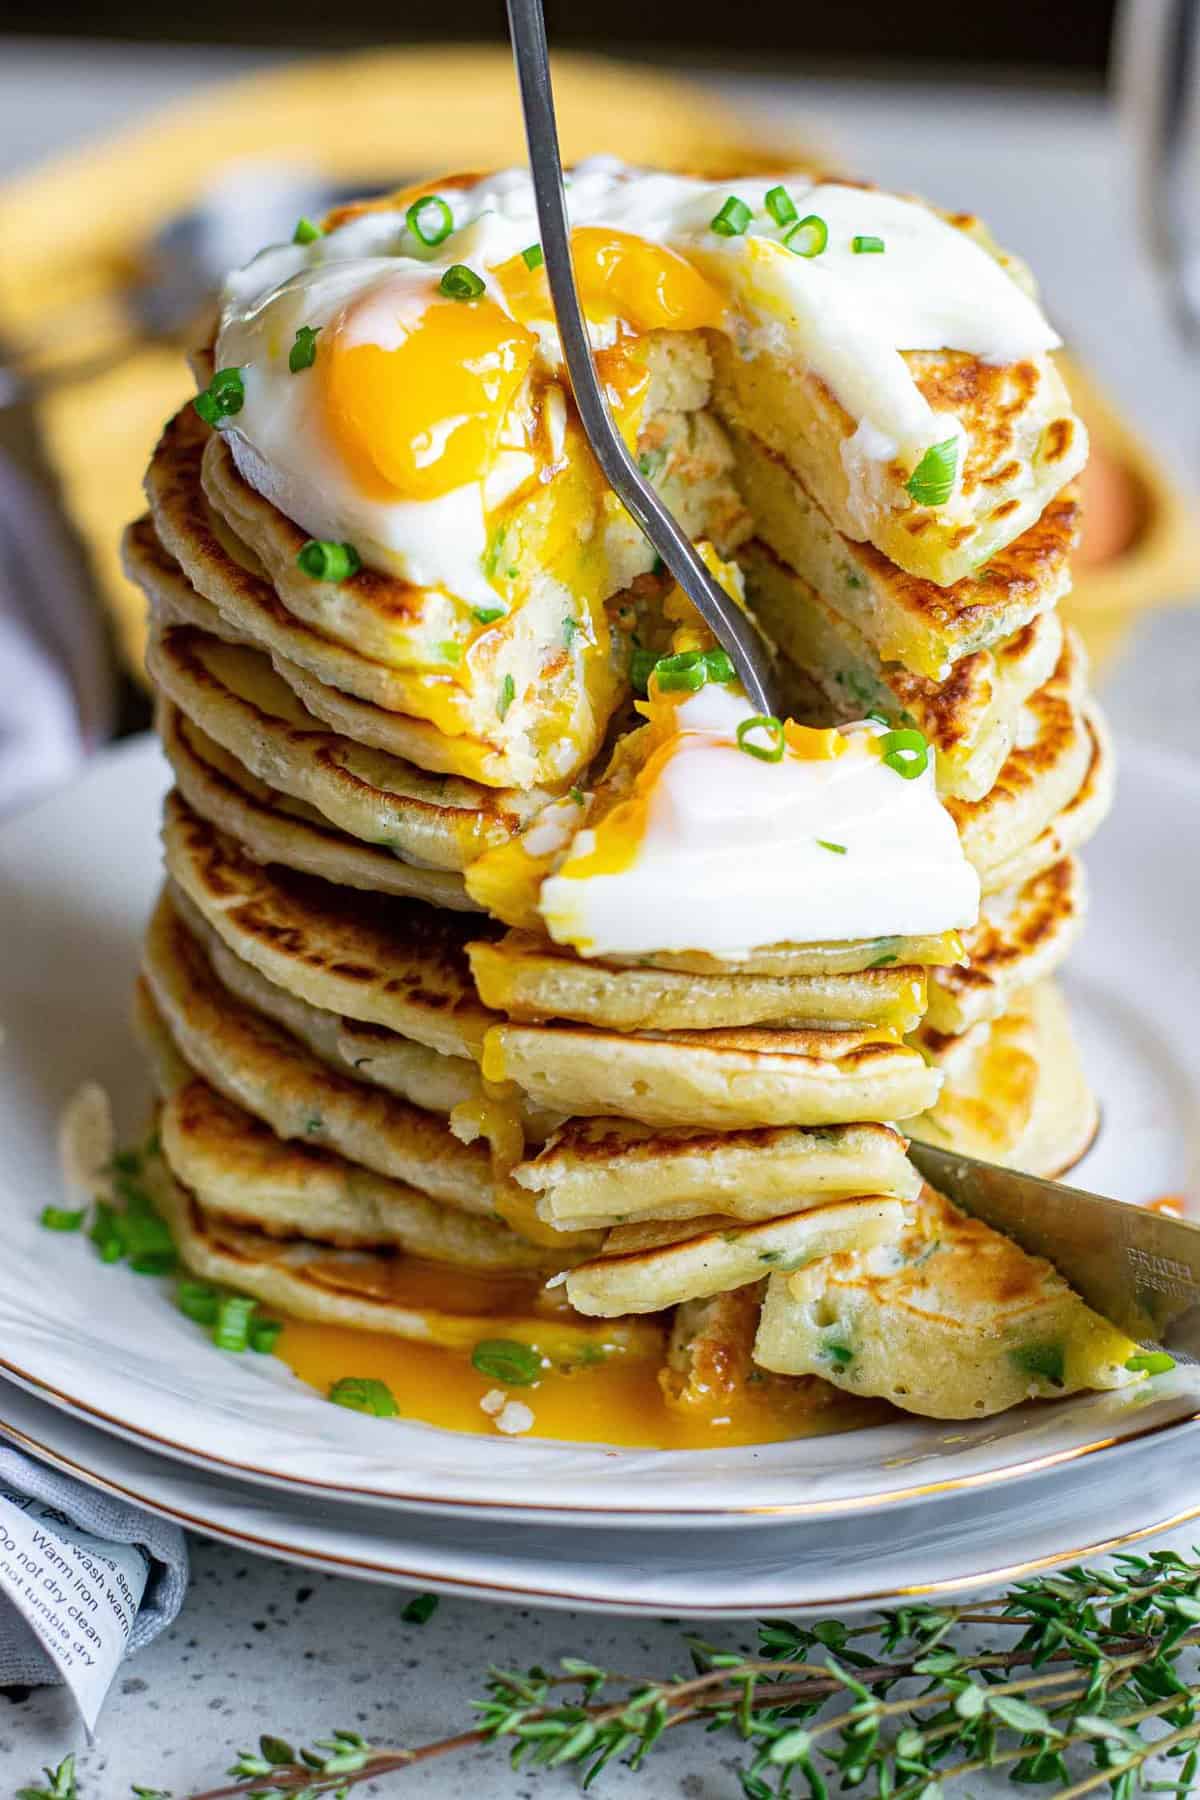 Stack of pancakes topped with an egg, being cut with a fork.